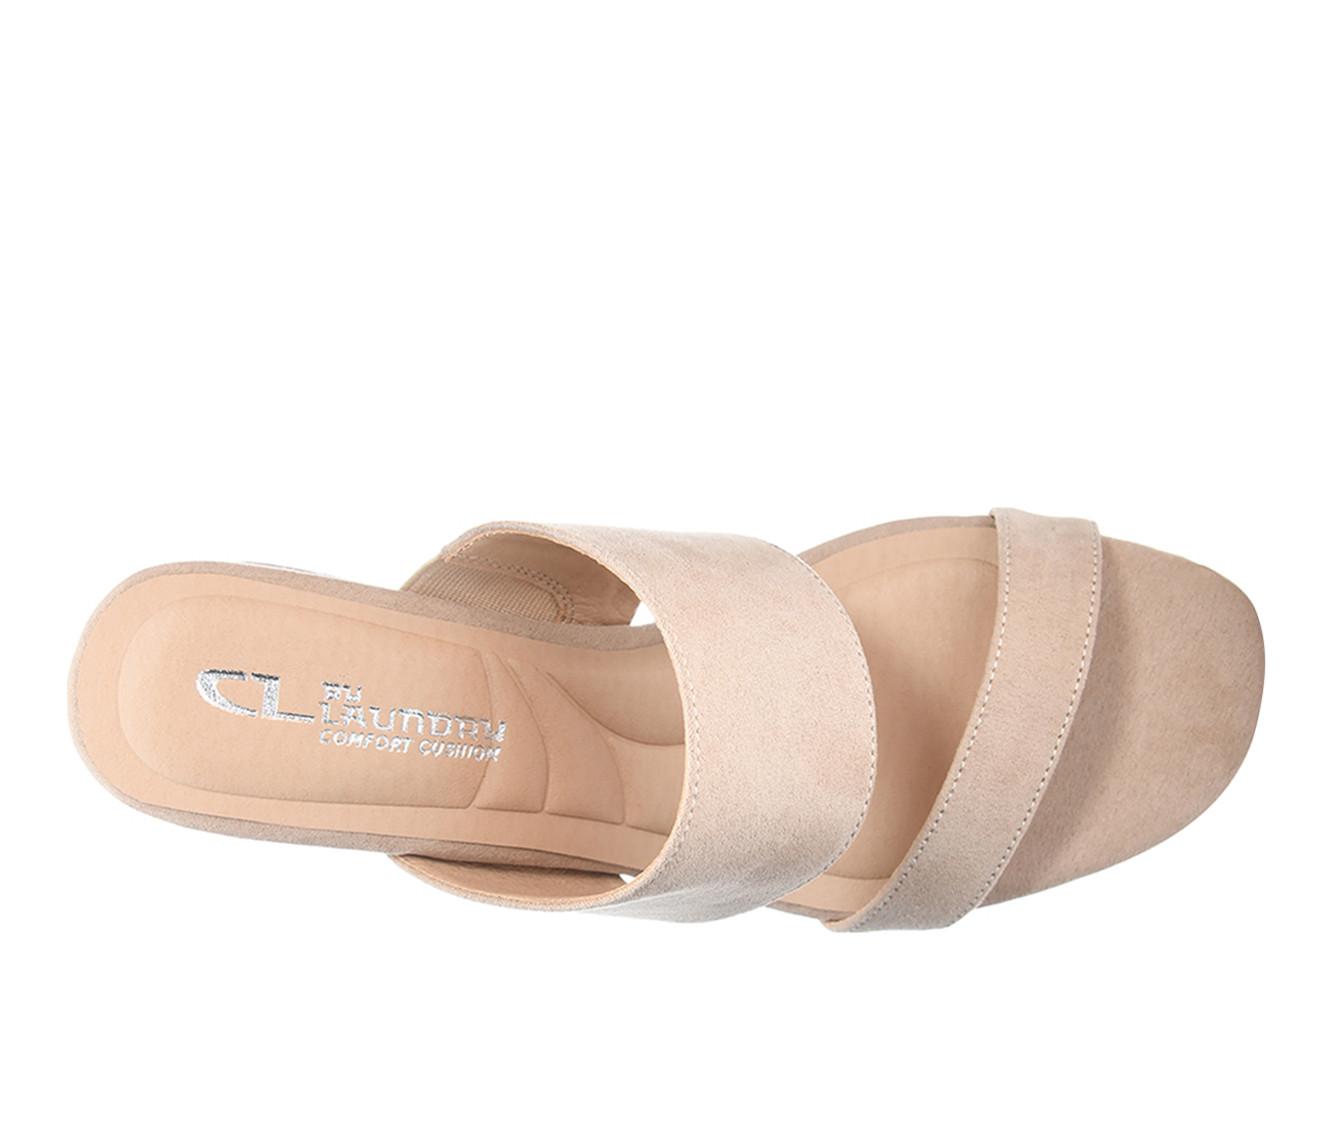 Women's CL By Laundry Fanciful Wedge Sandals